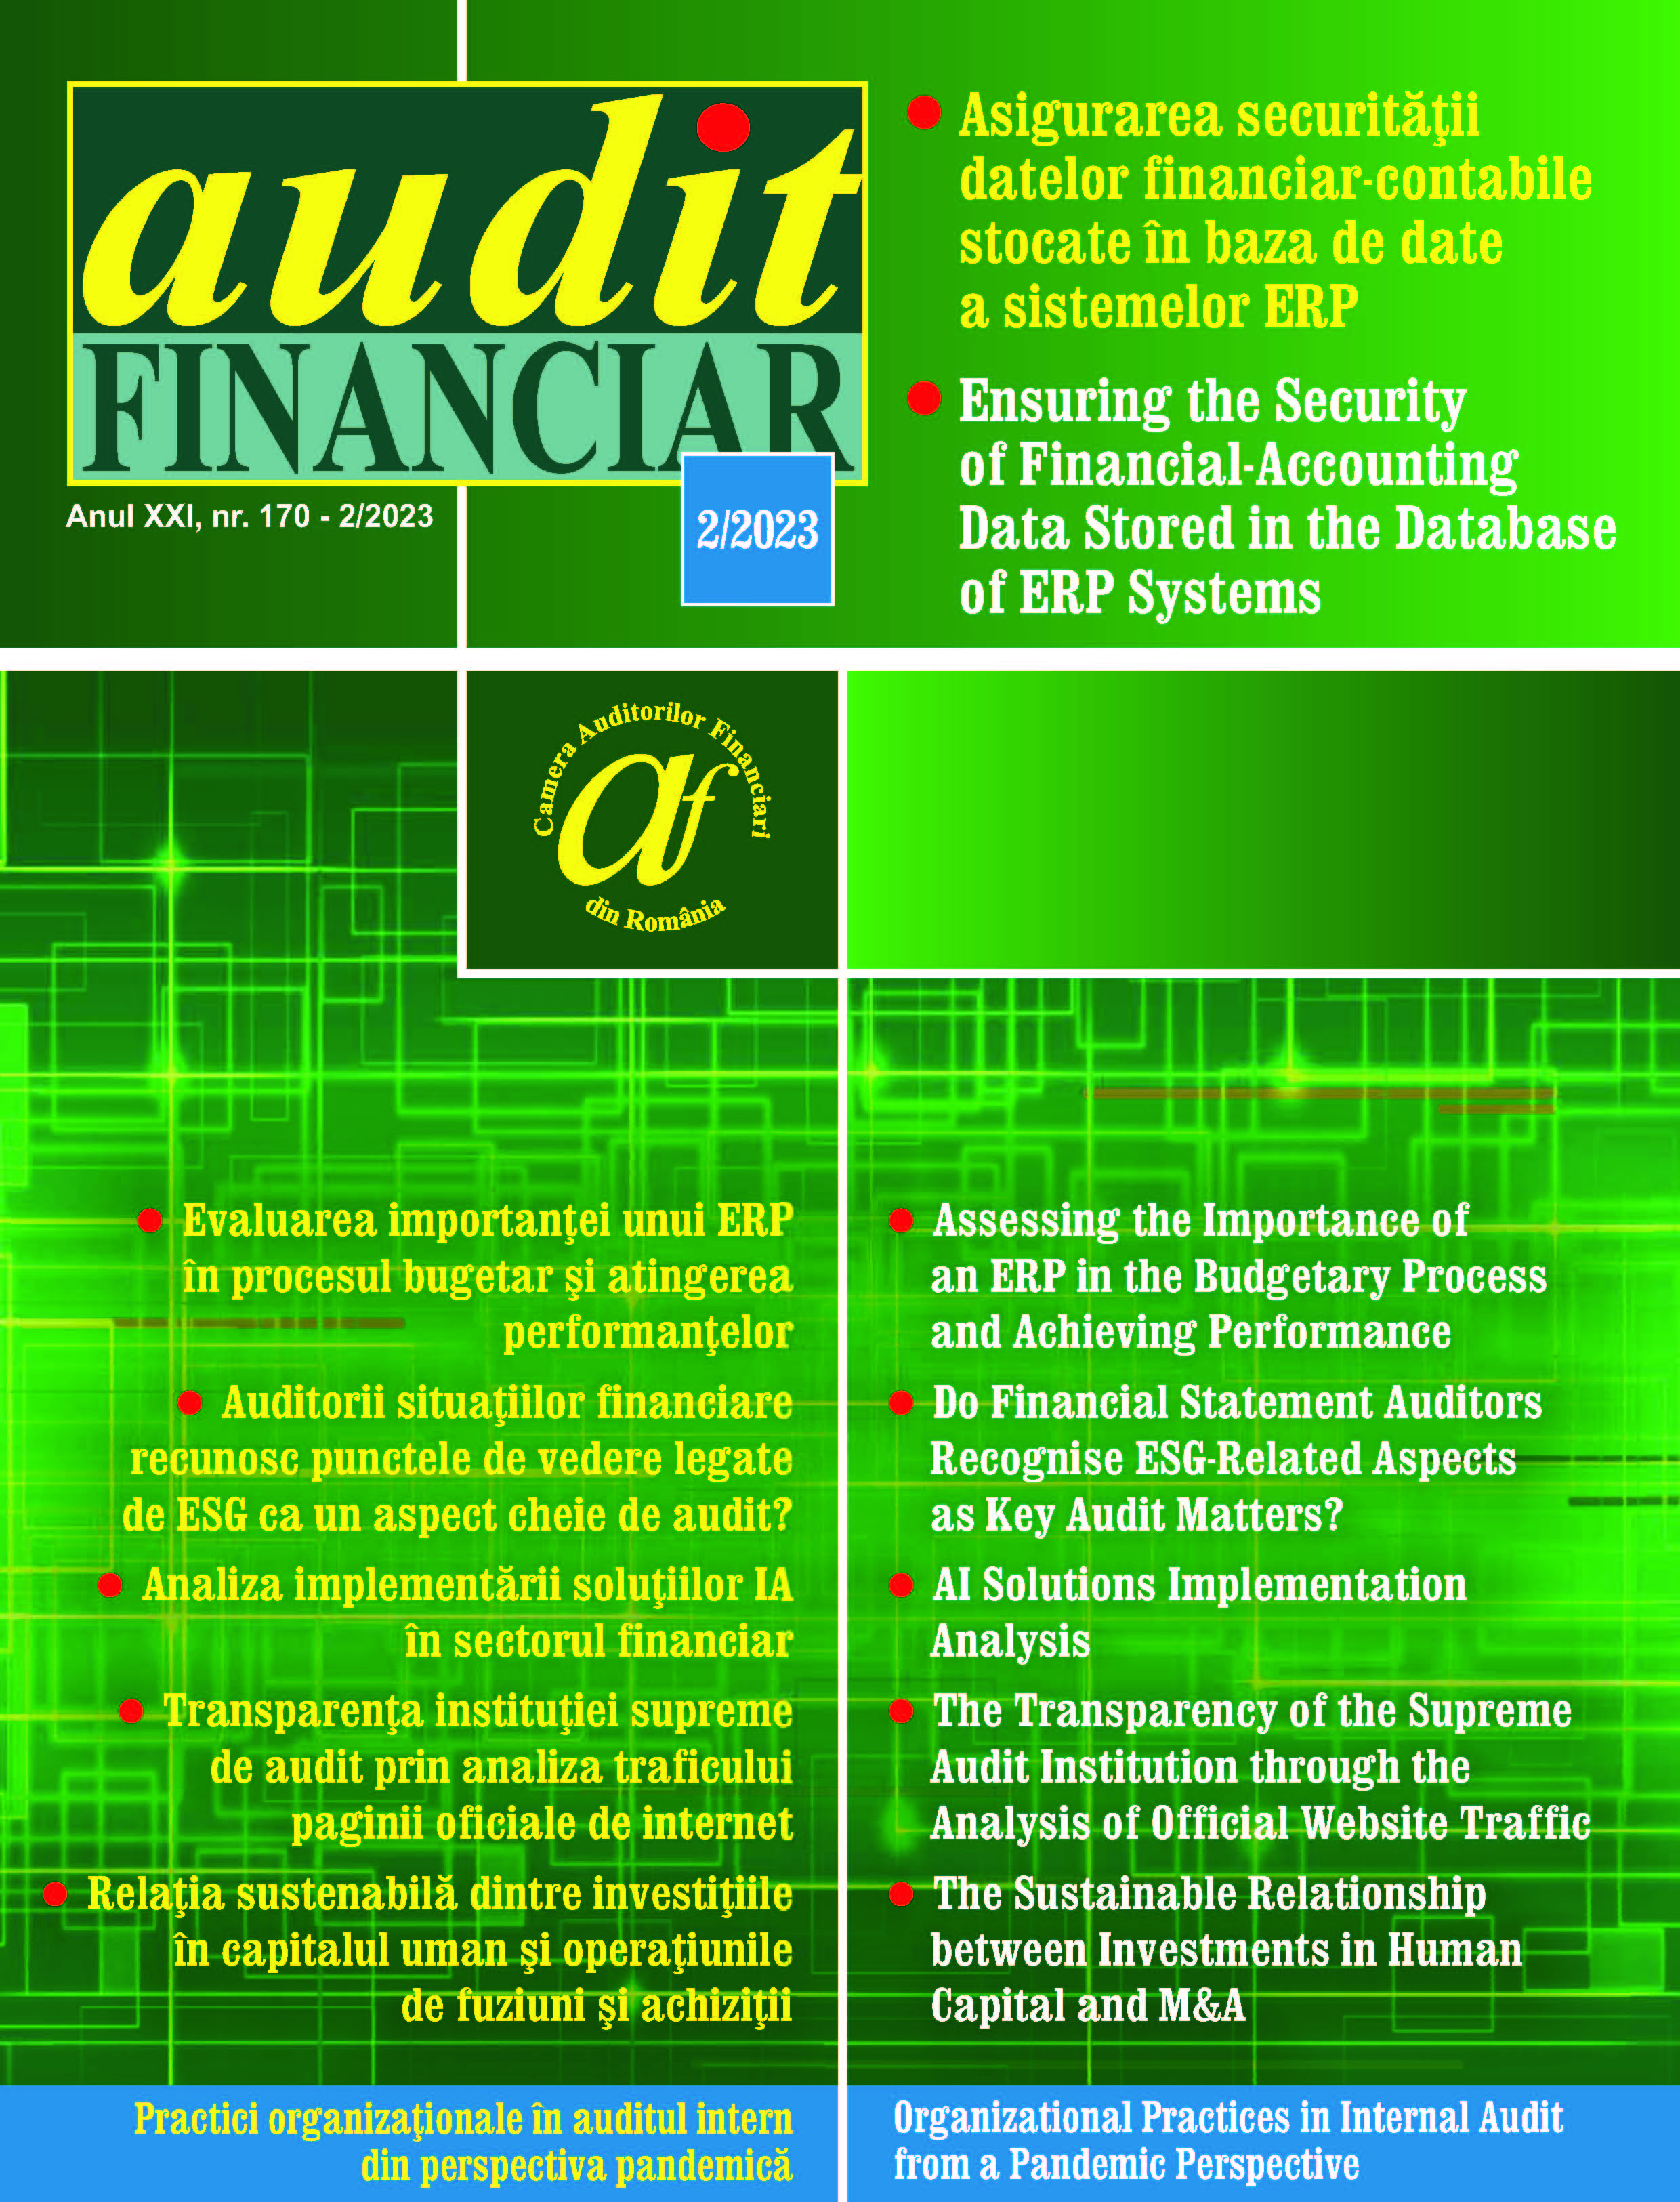 Ensuring the Security of Financial-Accounting Data Stored in the Database of ERP Systems Cover Image